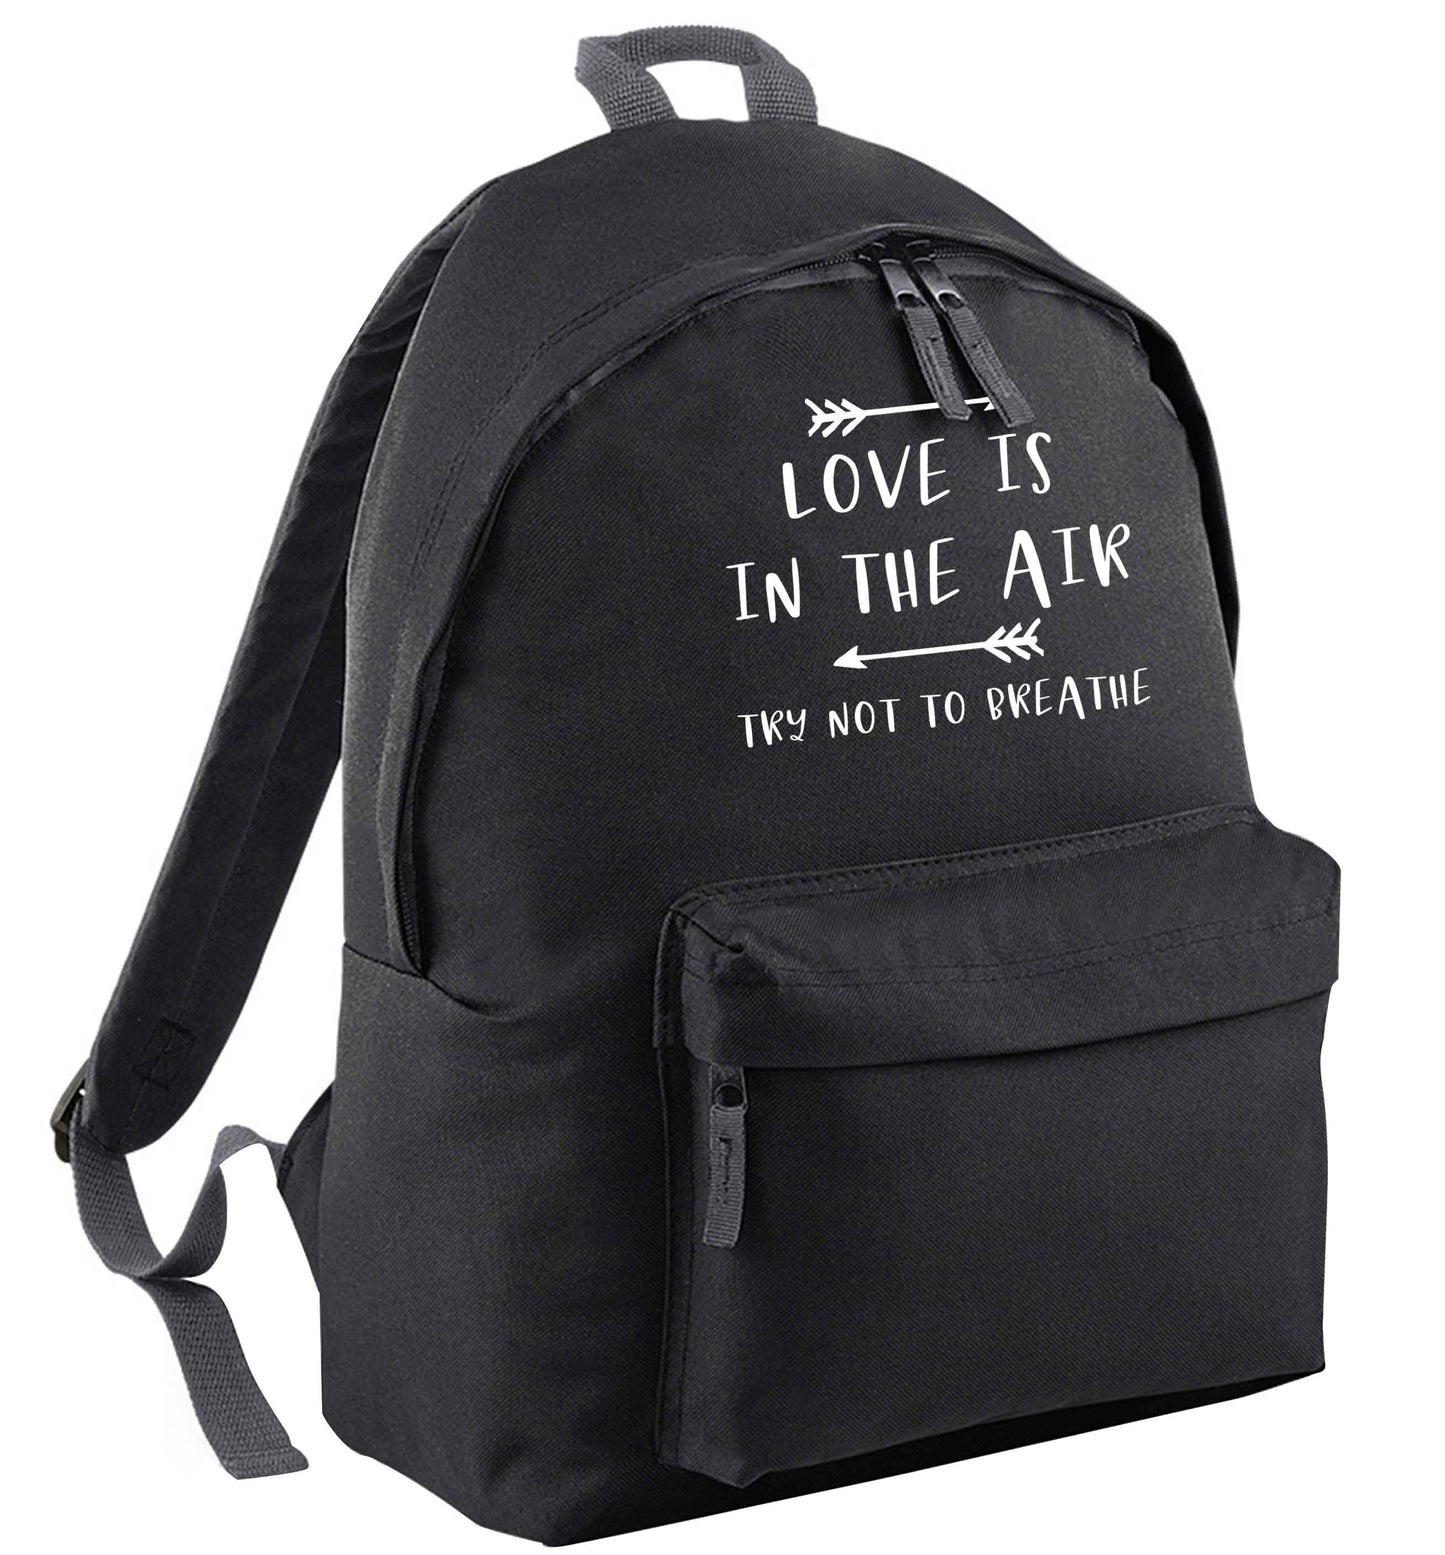 Love is in the air try not to breathe black adults backpack